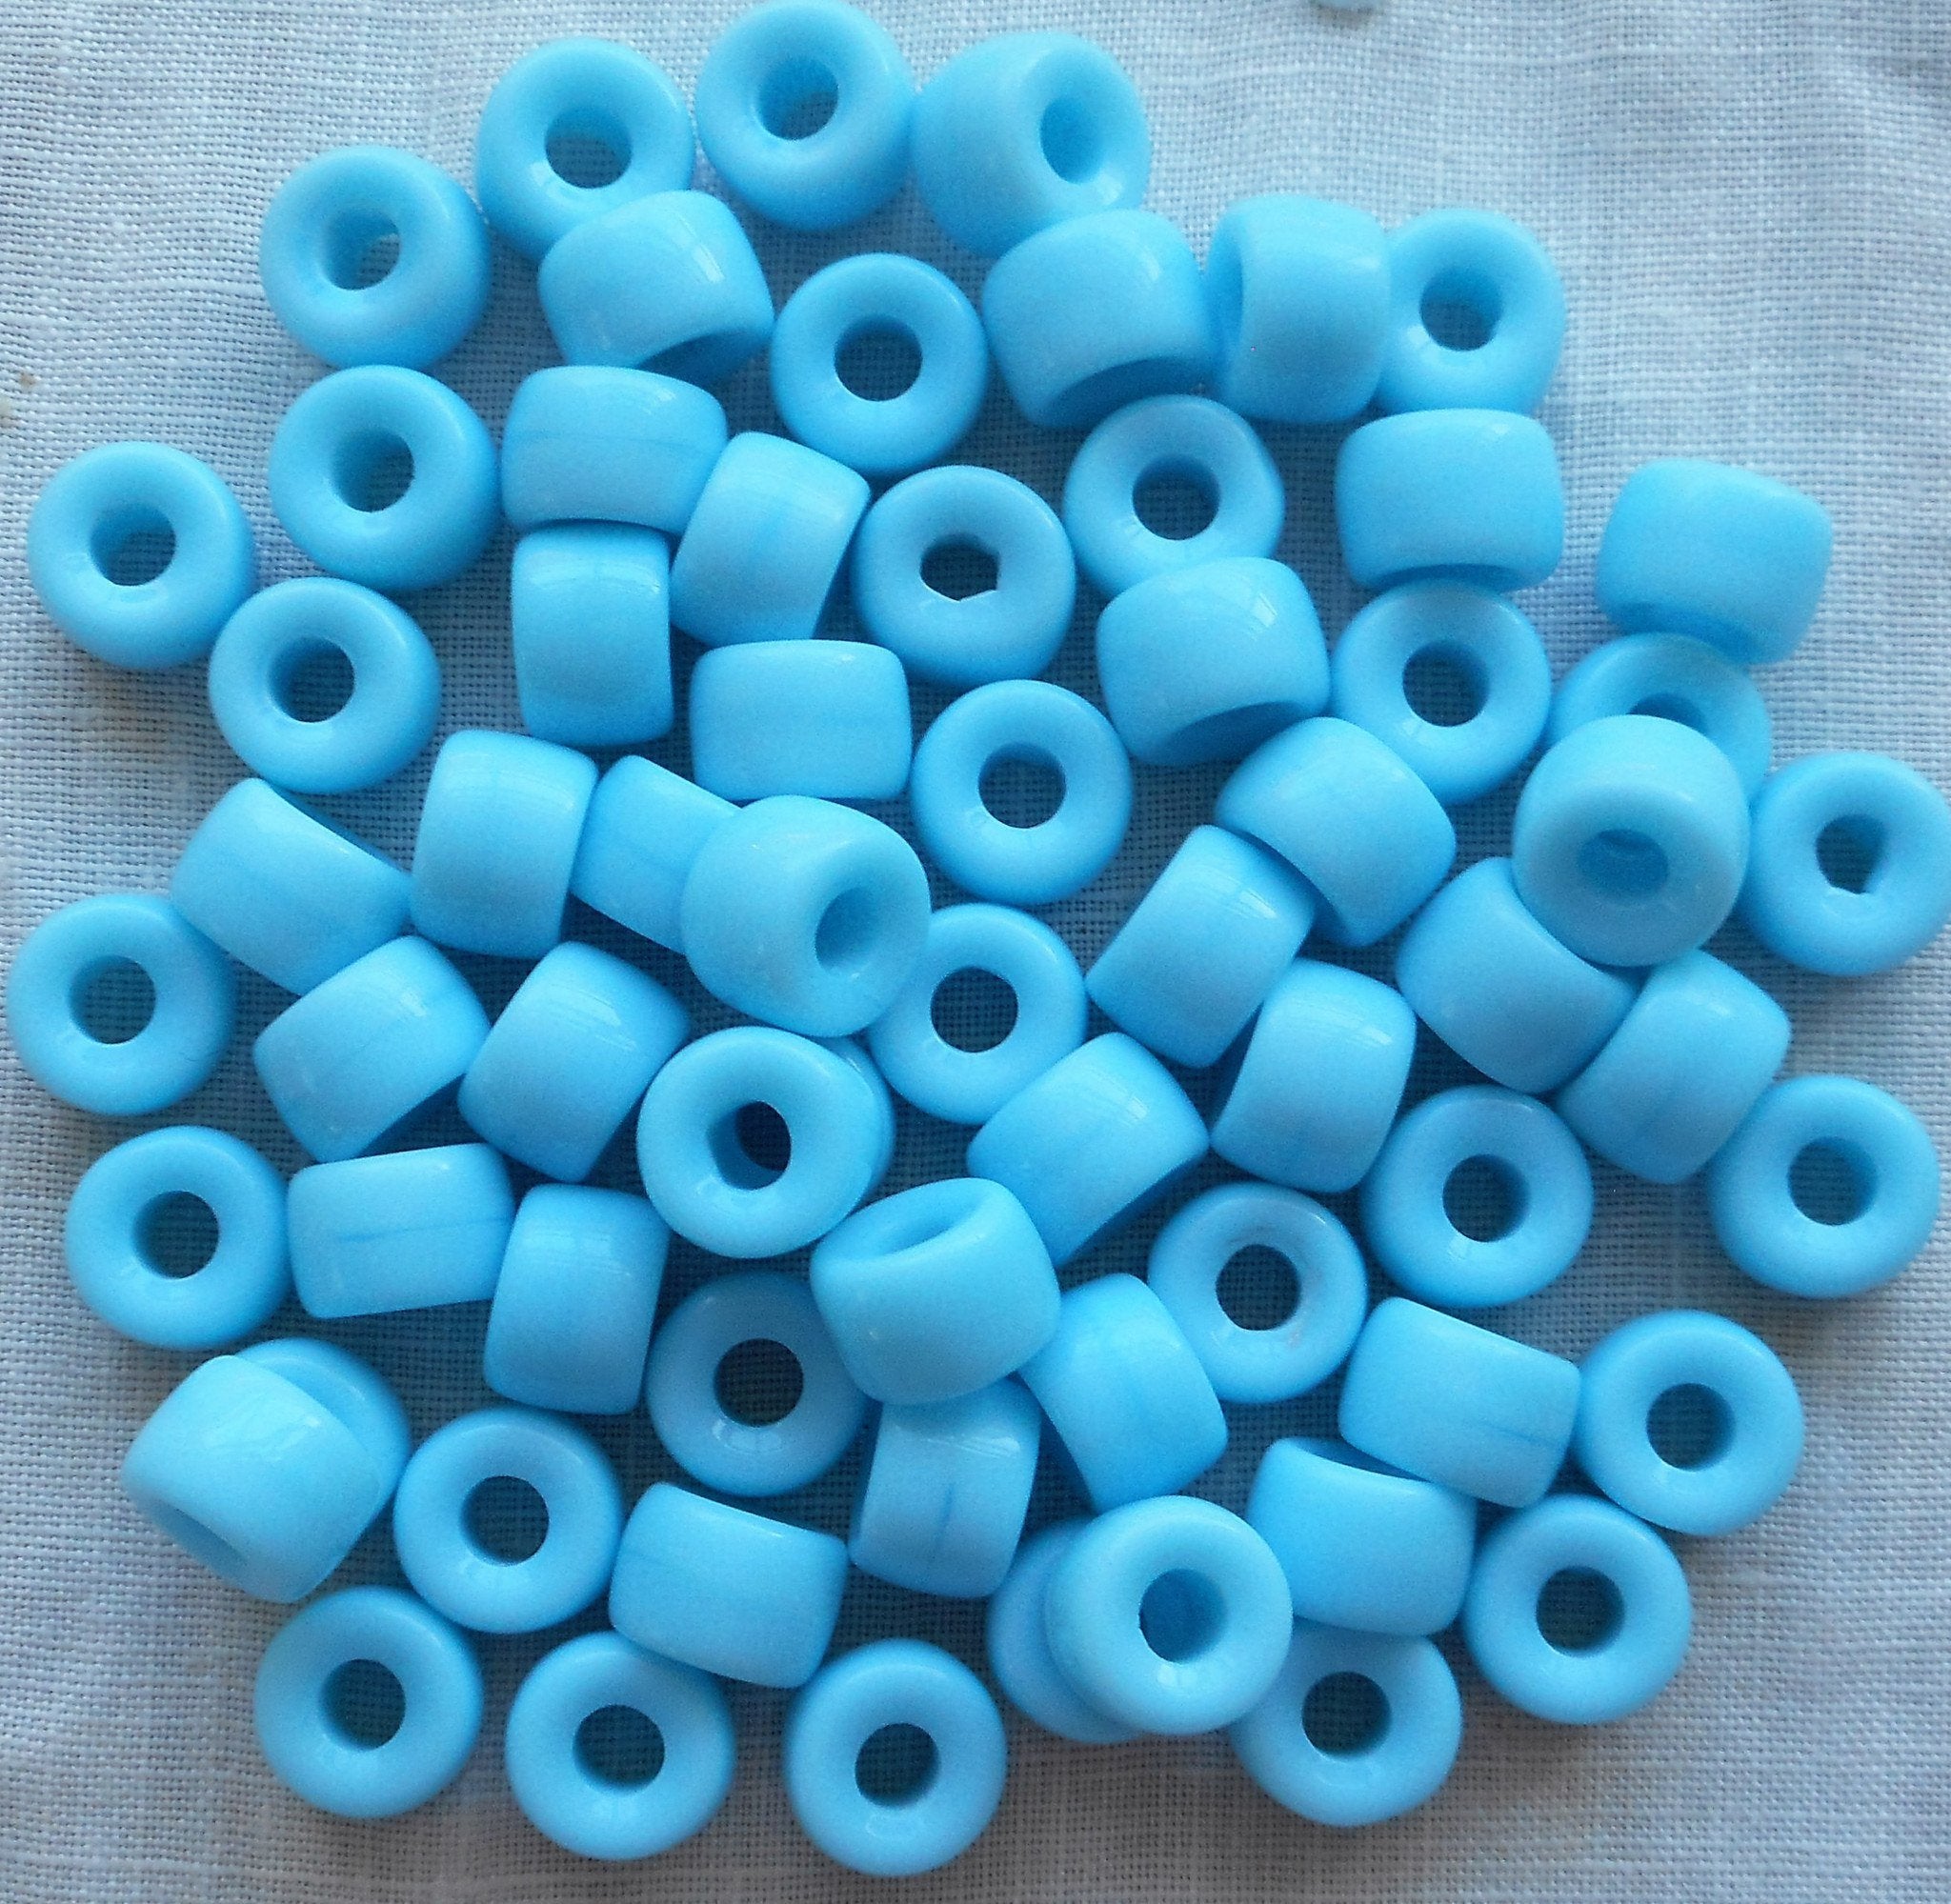 25 9mm Czech opaque turquoise blue pony roller beads, large hole